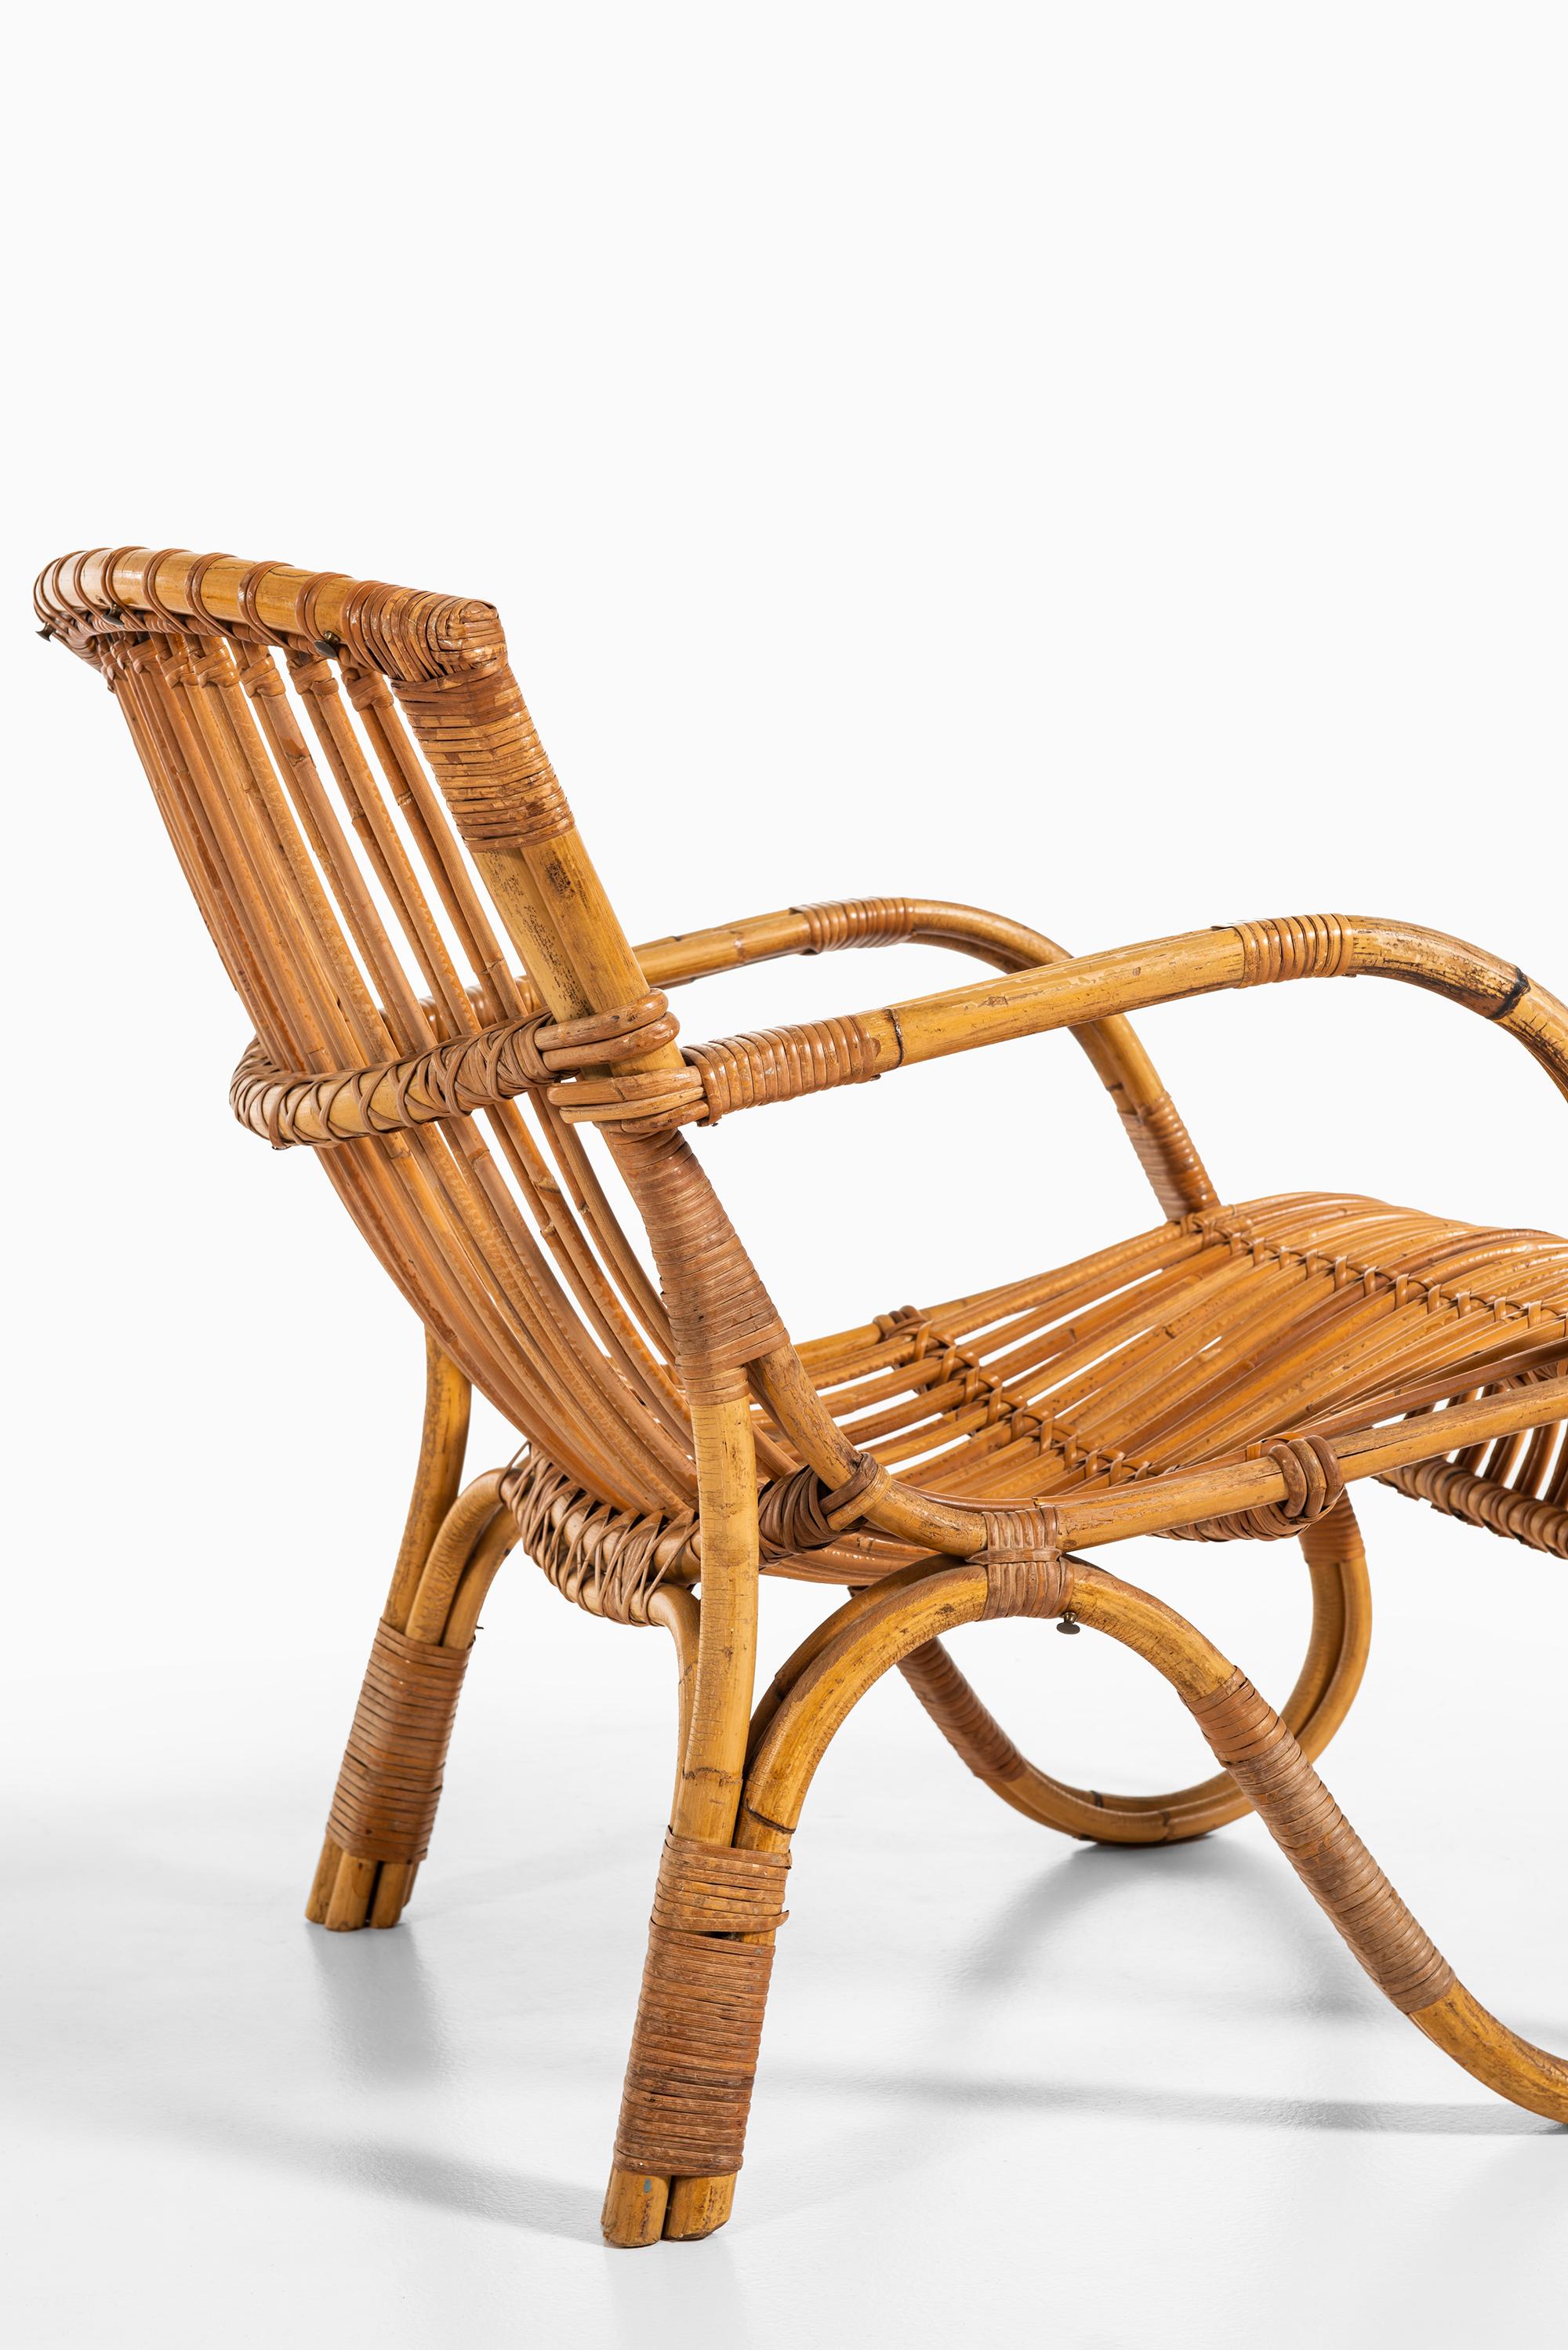 Scandinavian Modern Pair of Easy Chairs in Rattan and Cane by E.V.A. Nissen & Co in Denmark